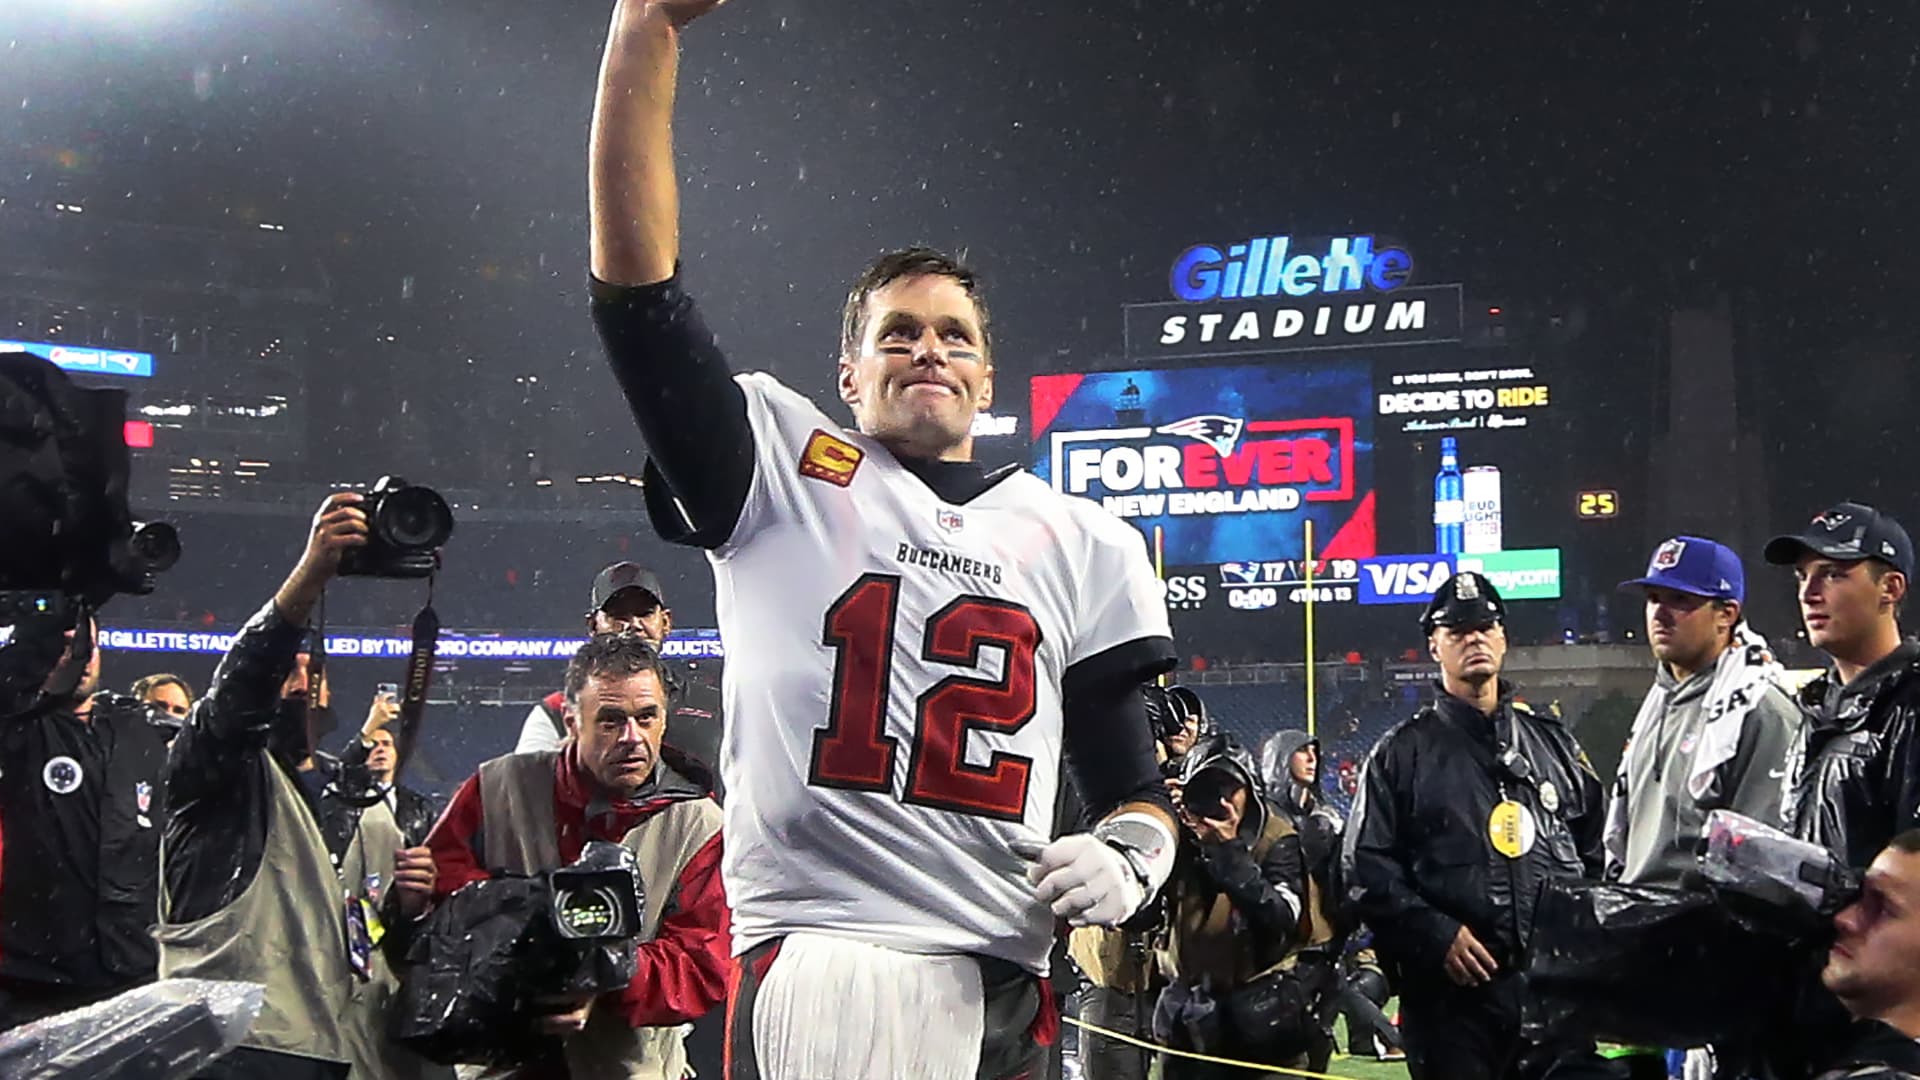 Tom Brady waves to cheering fans as he leaves the field following the Bucs victory. The New England Patriots host the Tampa Bay Buccaneers in a regular season NFL game at Gillette Stadium in Foxborough, MA on Sunday, Oct. 3, 2021.